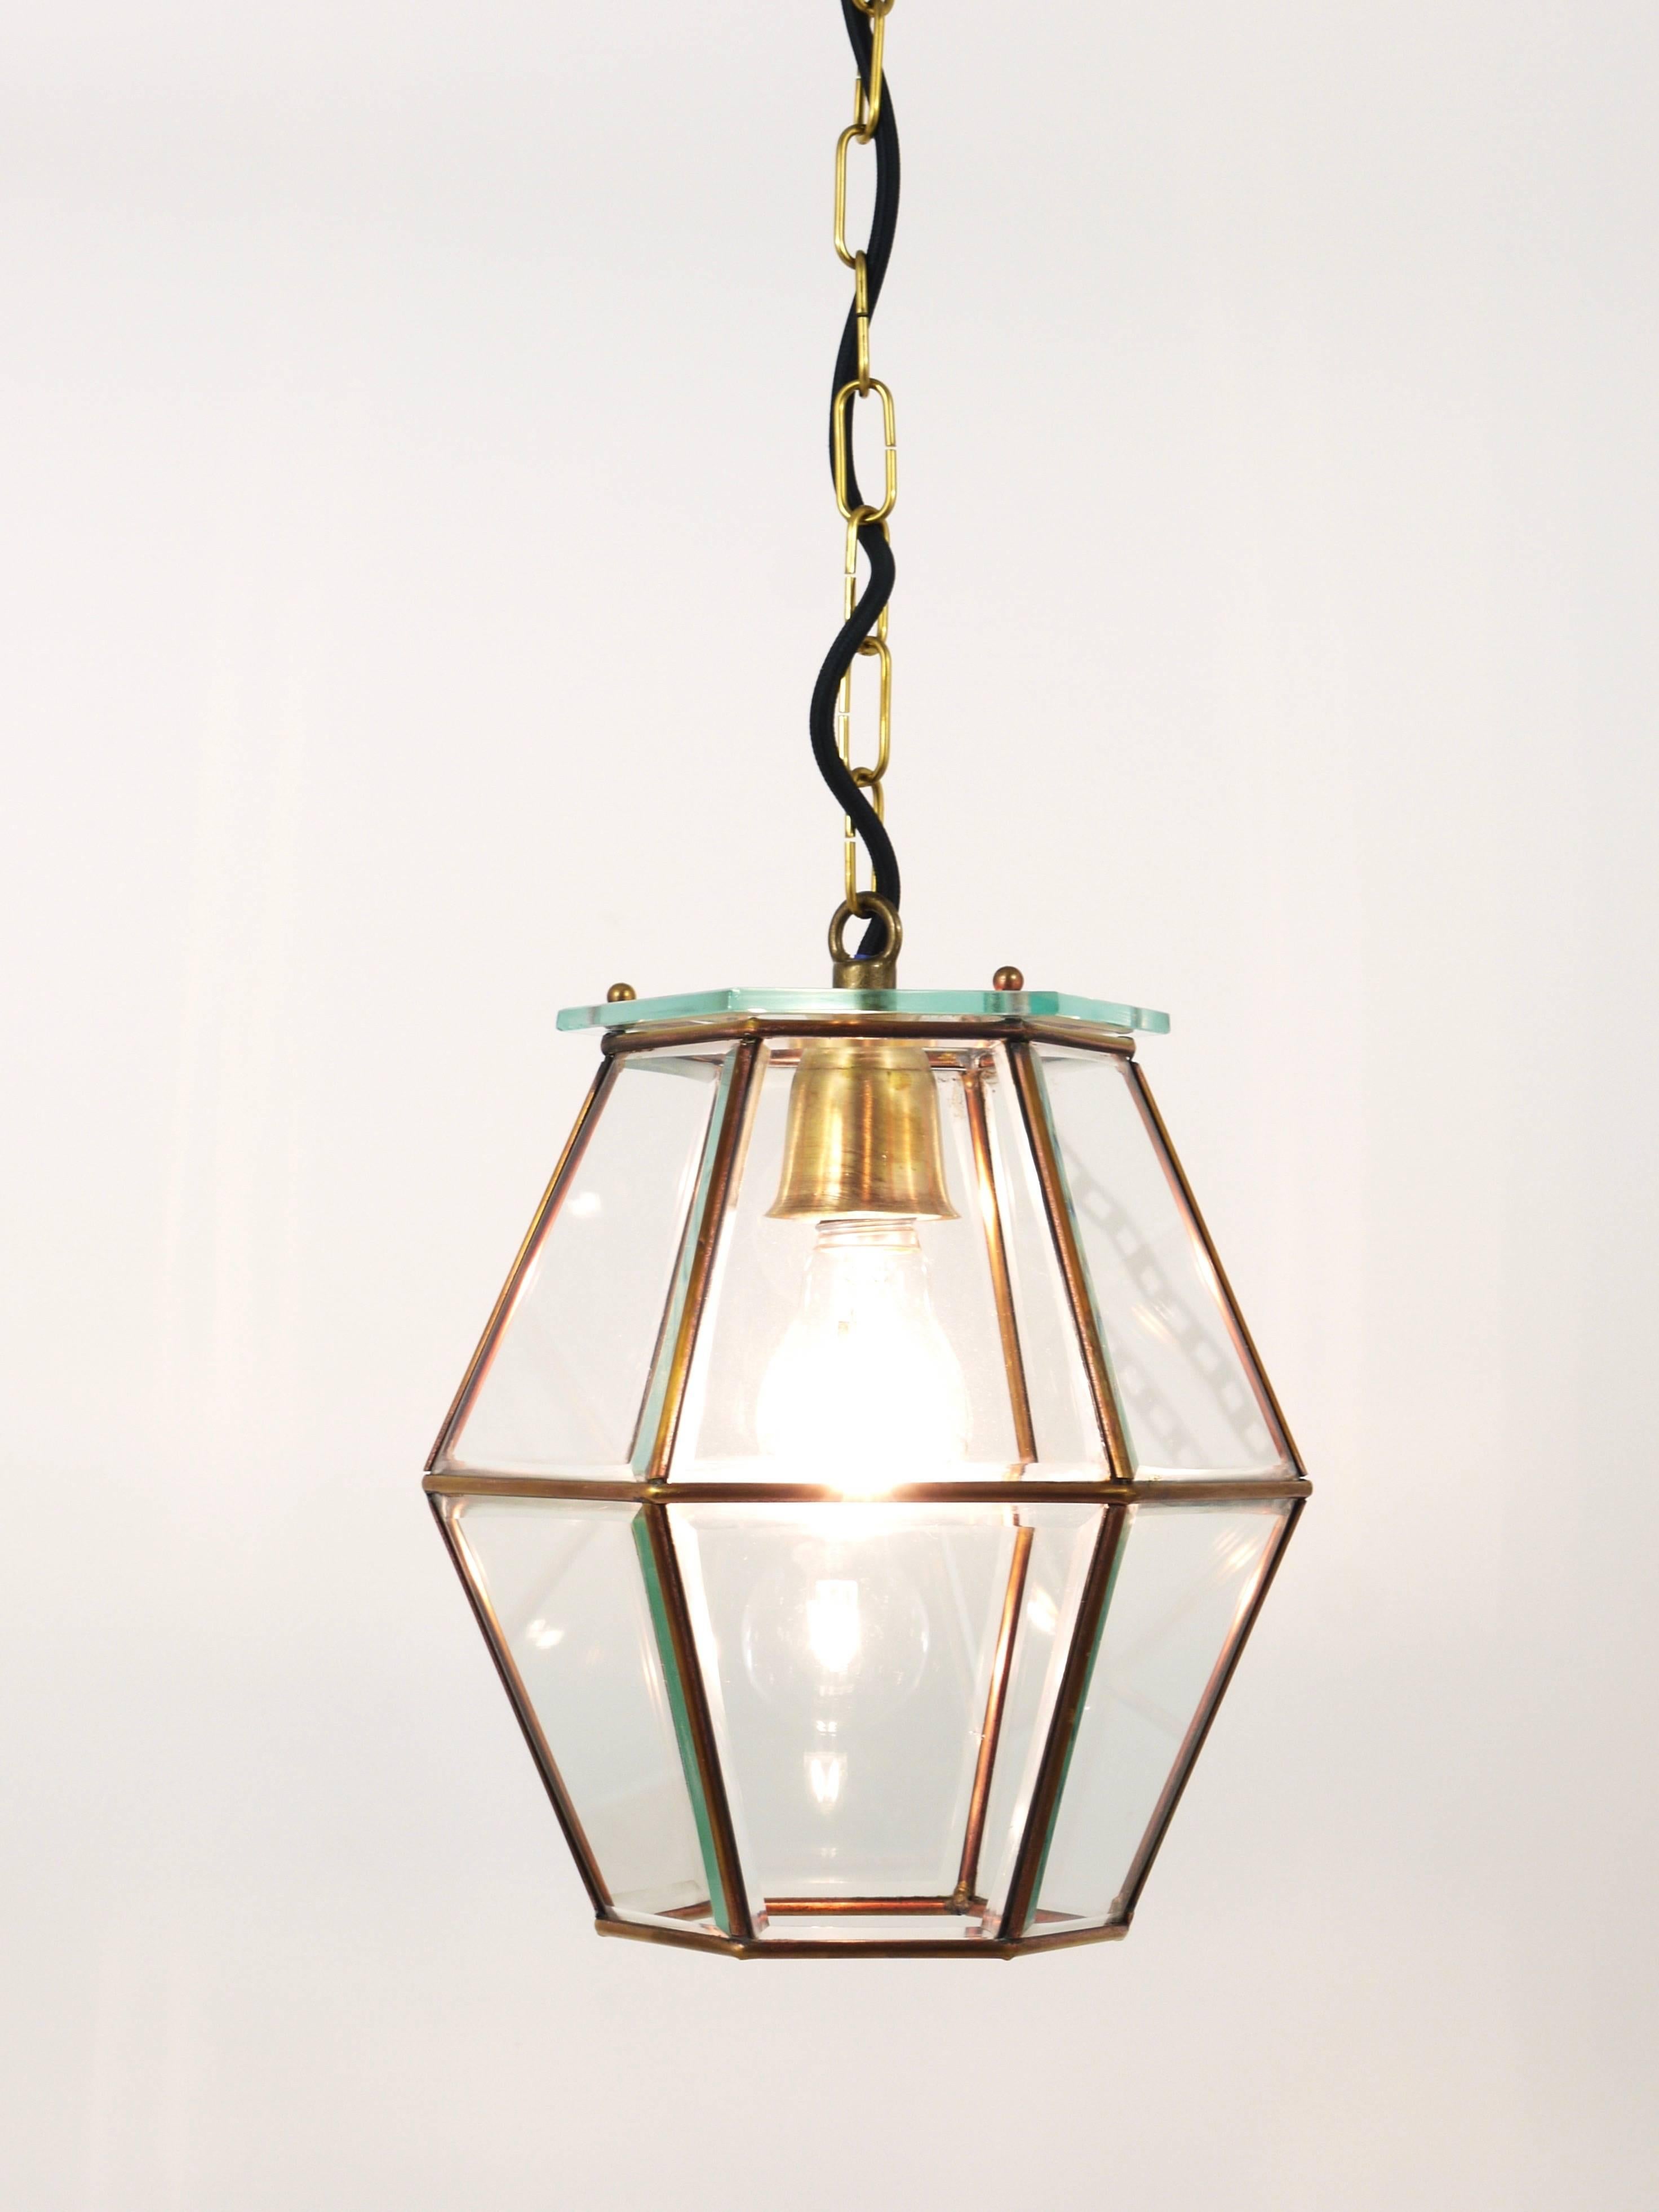 Early 20th Century Art Nouveau Pendant Lamp Lantern in the Manner of Adolf Loos, Knize, 1900s For Sale